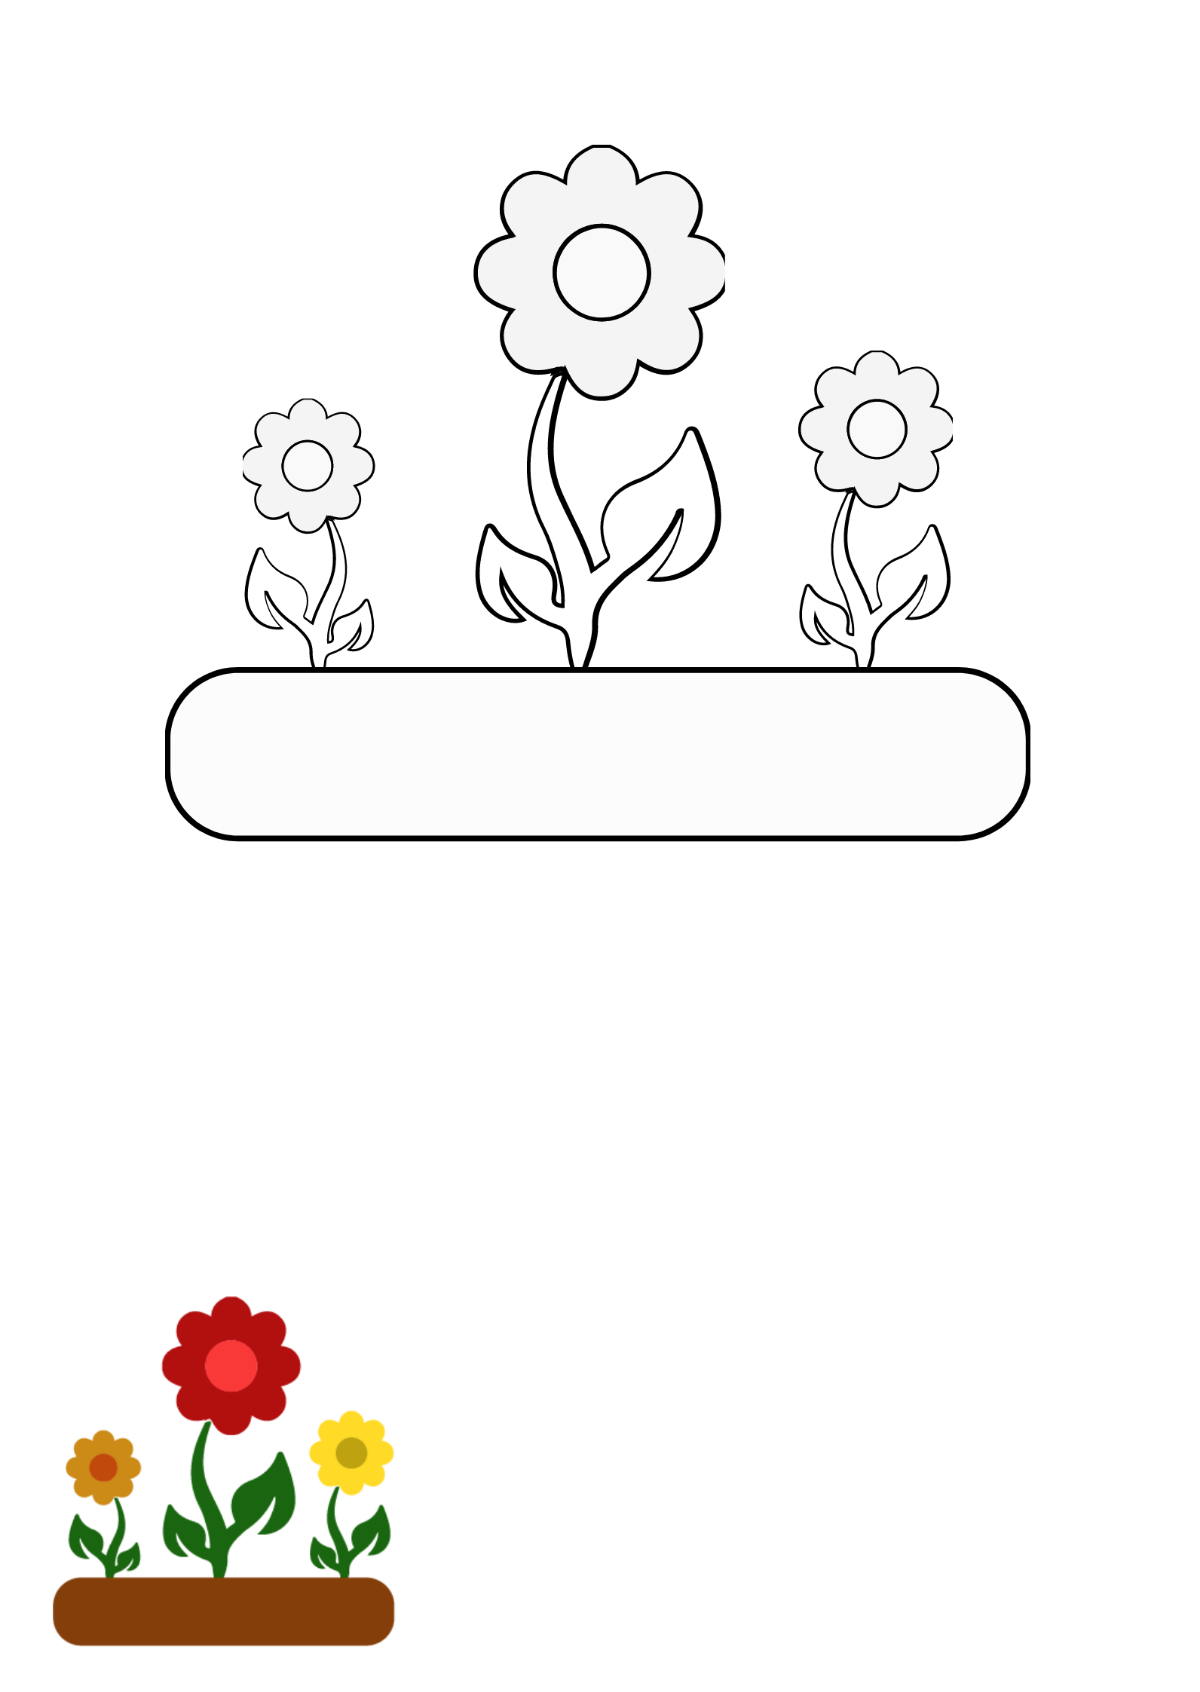 Flower Garden Coloring Page Template